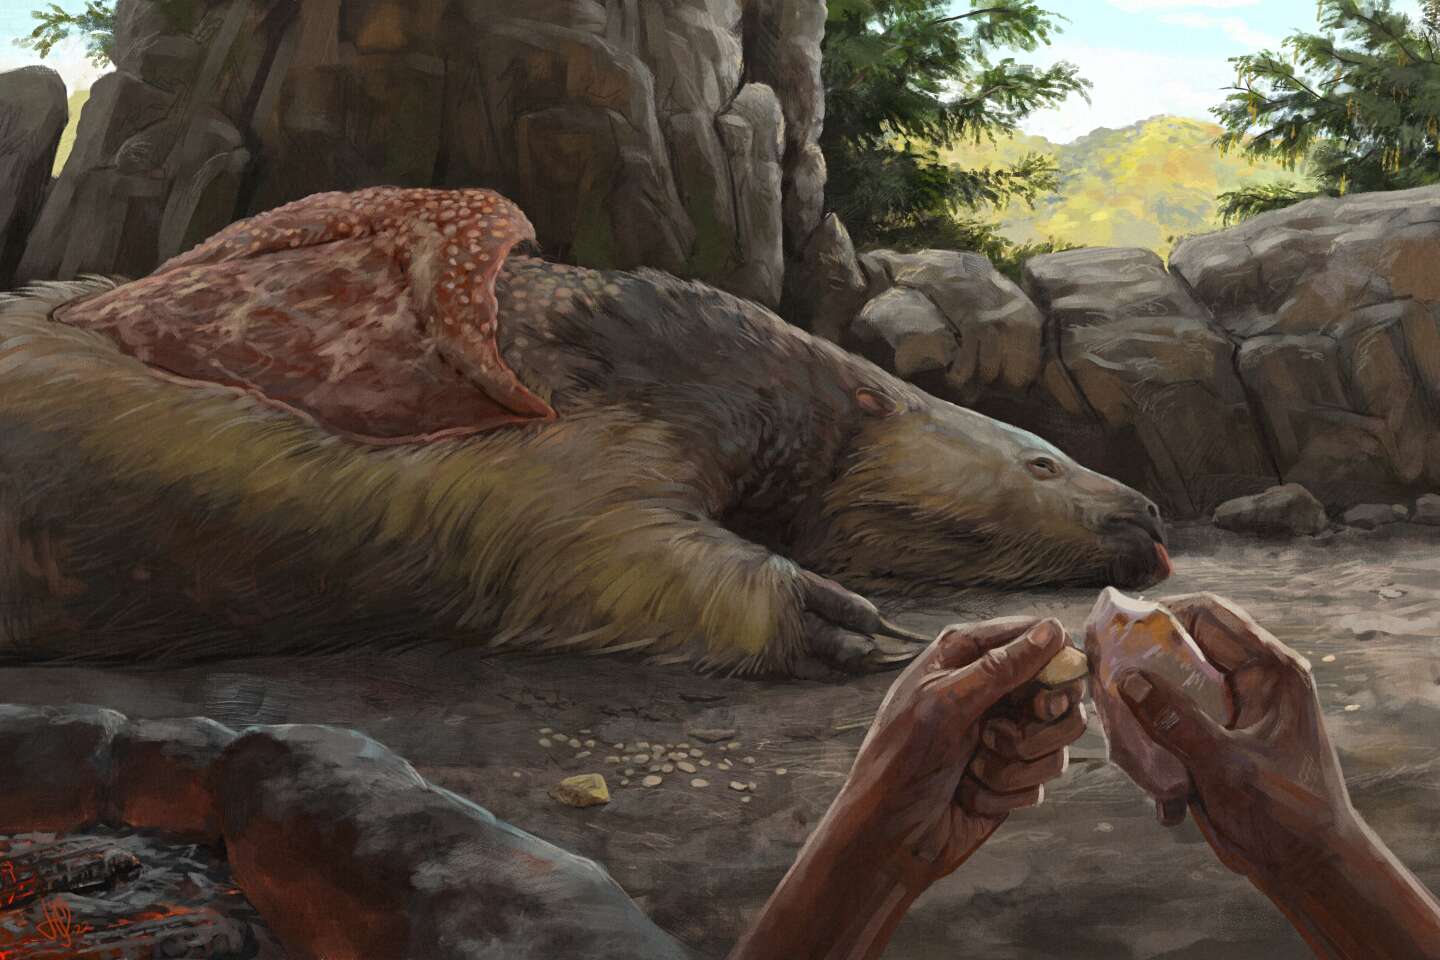 Giant sloth, source of adornment for prehistoric Brazilians